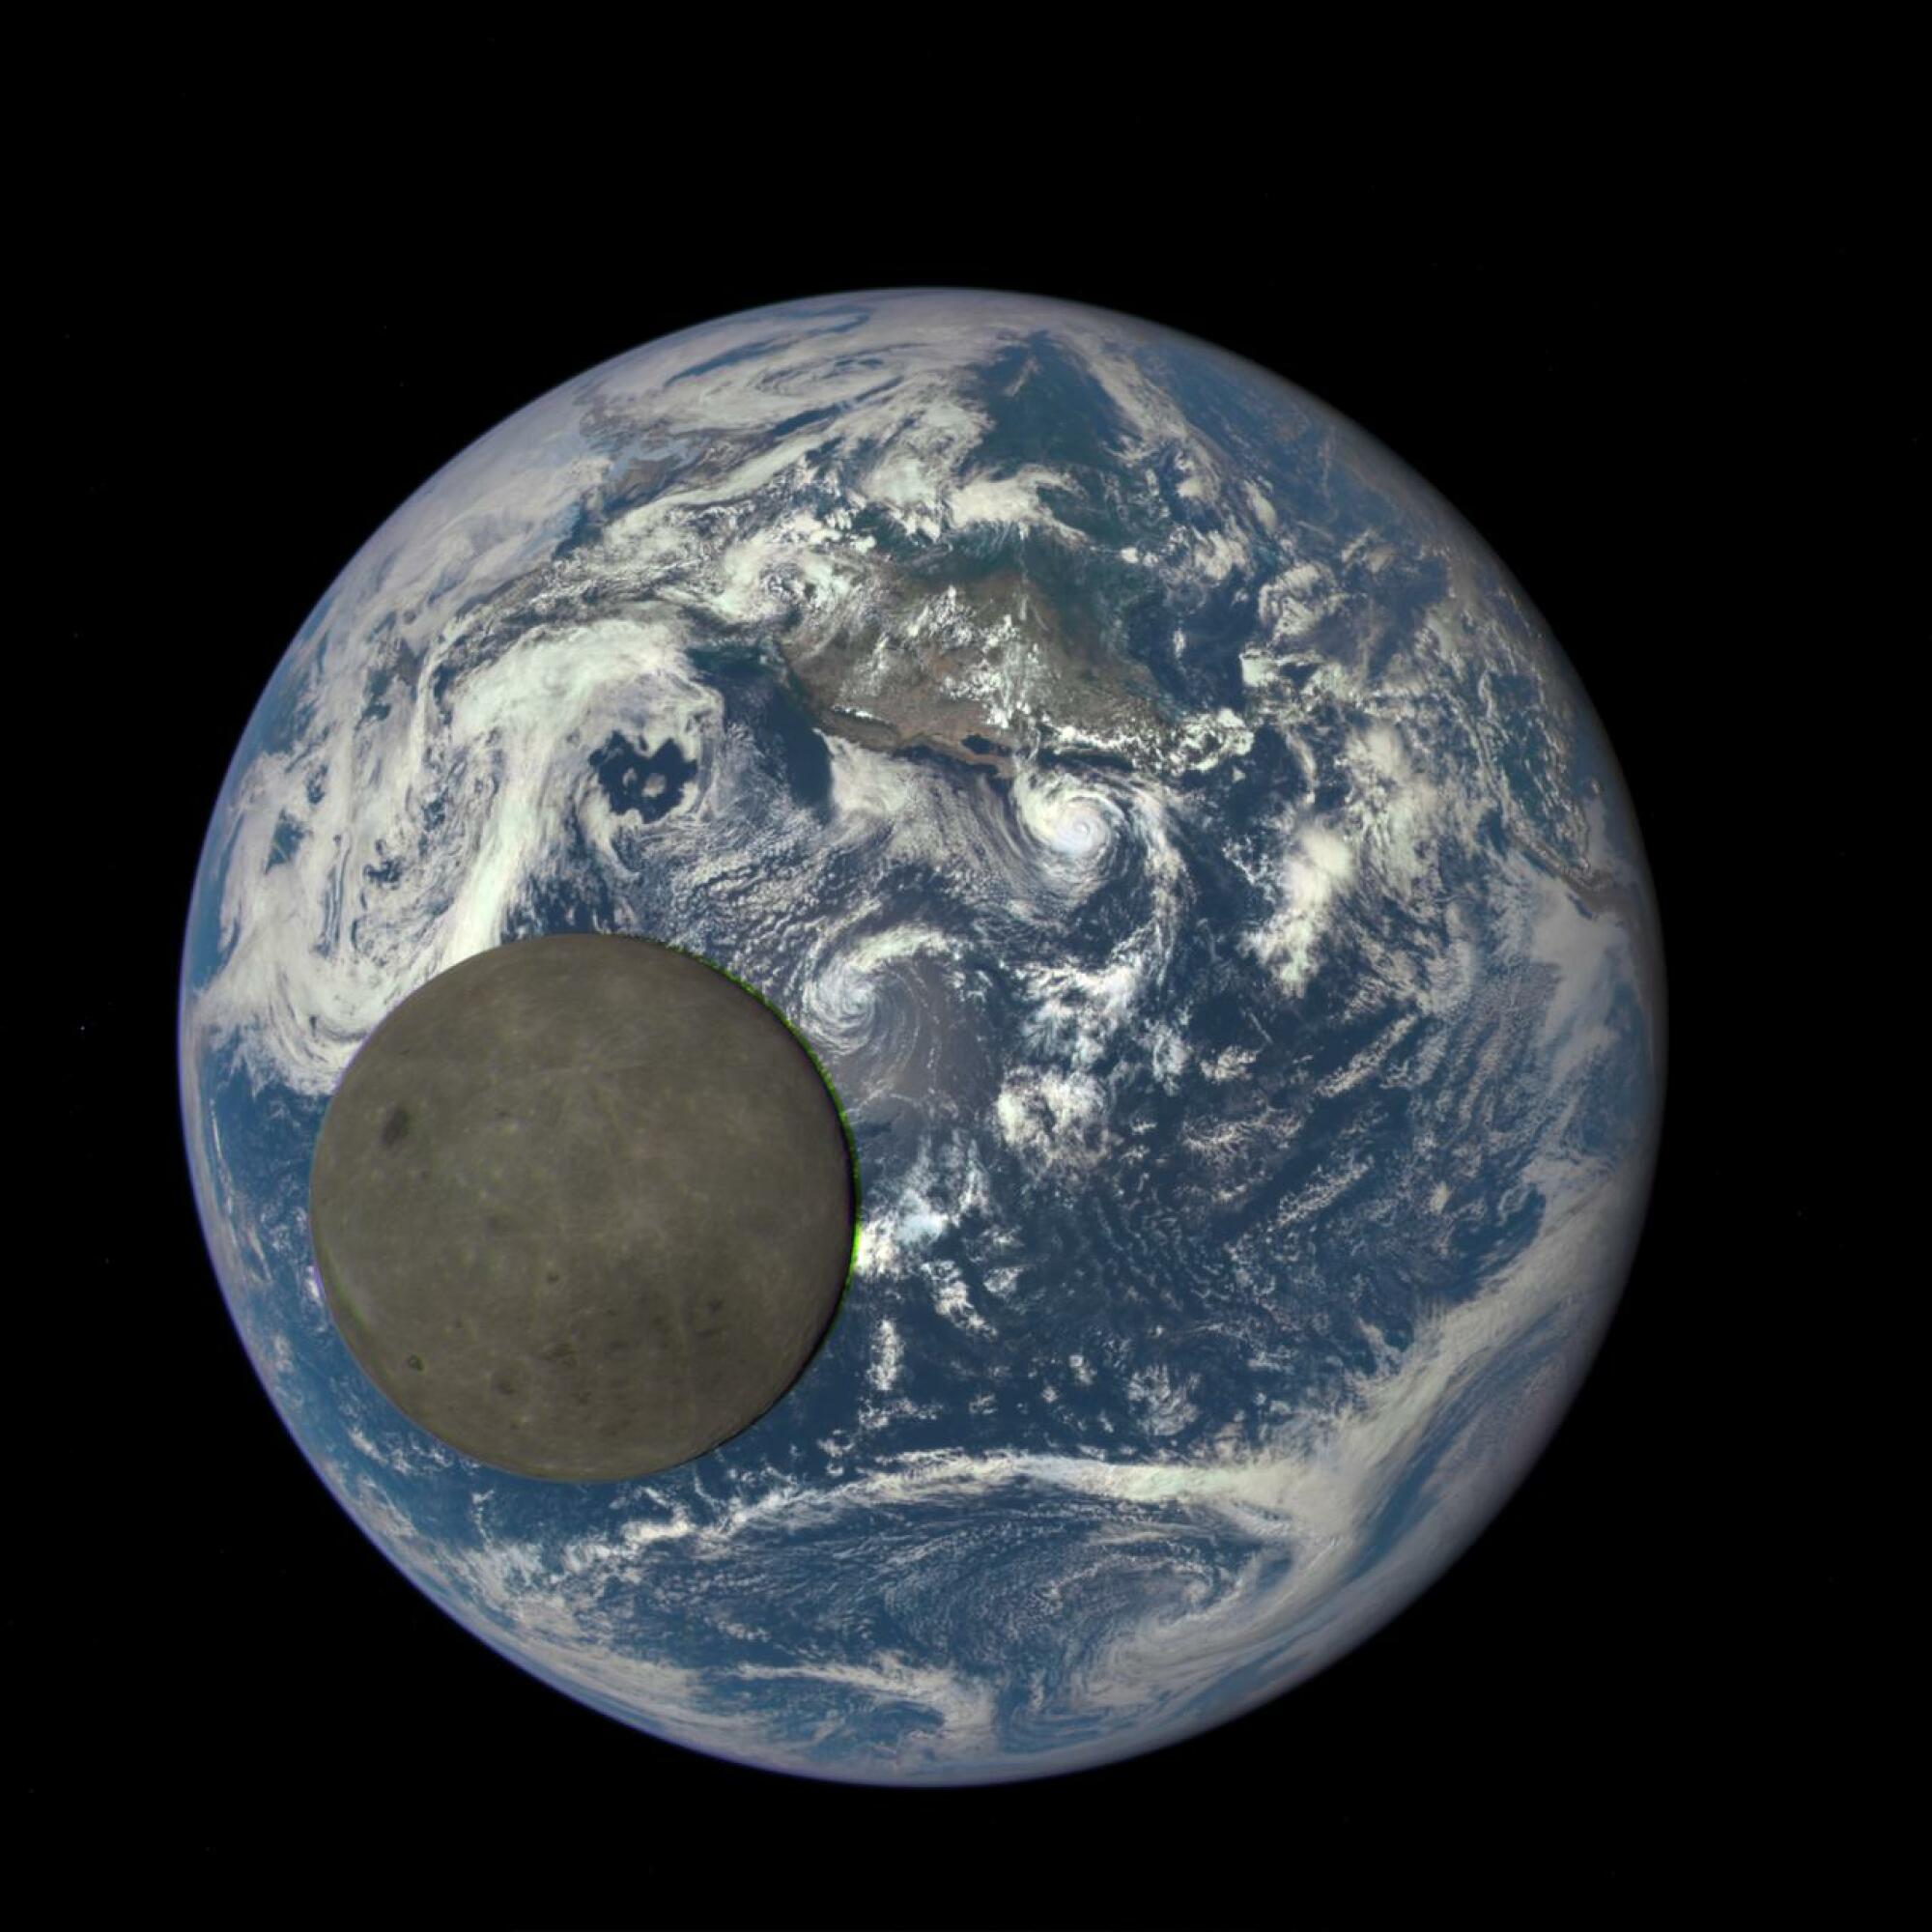 NASA satellite camera viewing far side of the moon